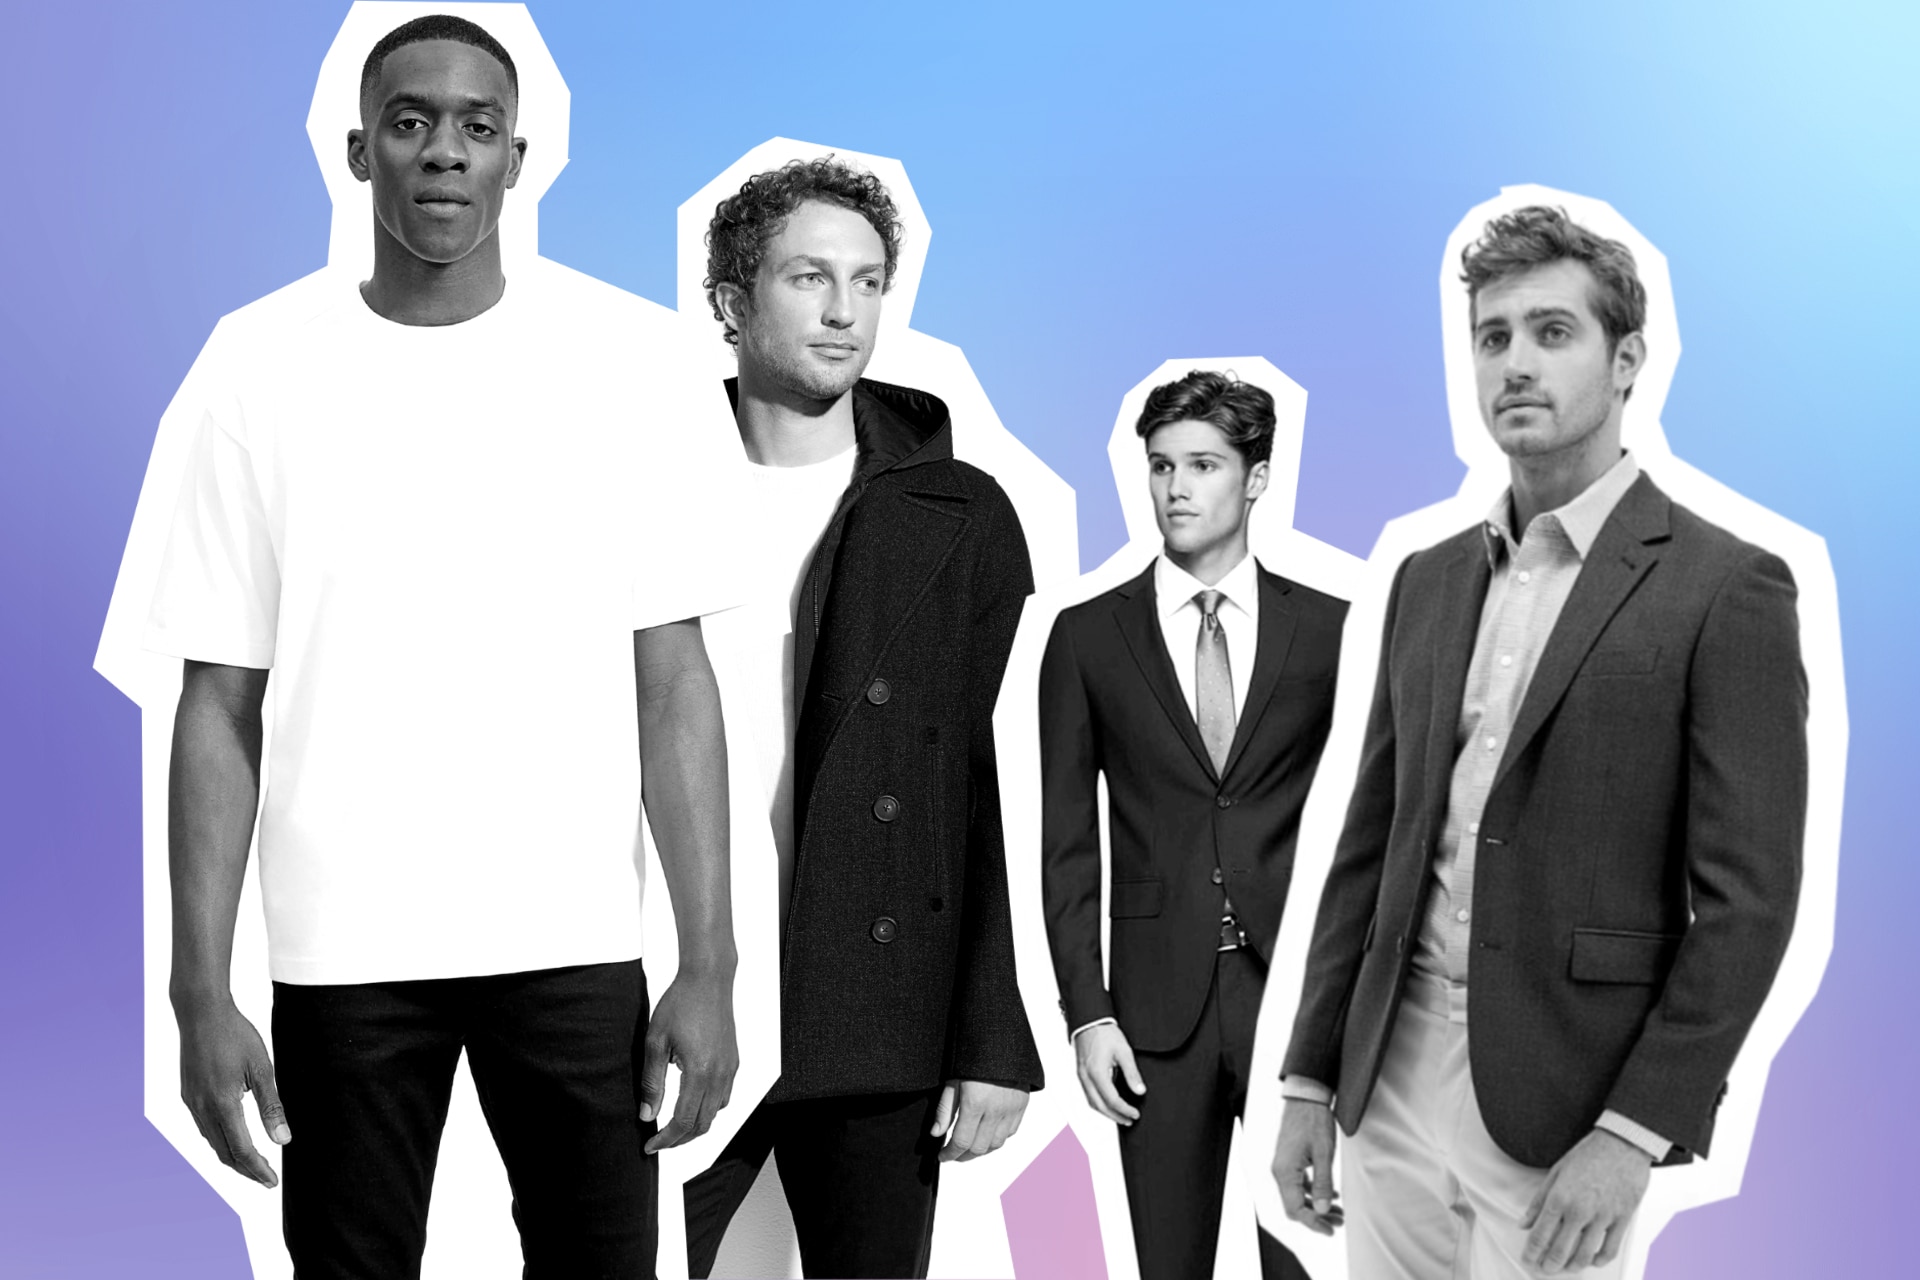 7 things every man should have in his wardrobe in 2022 – GQ Australia